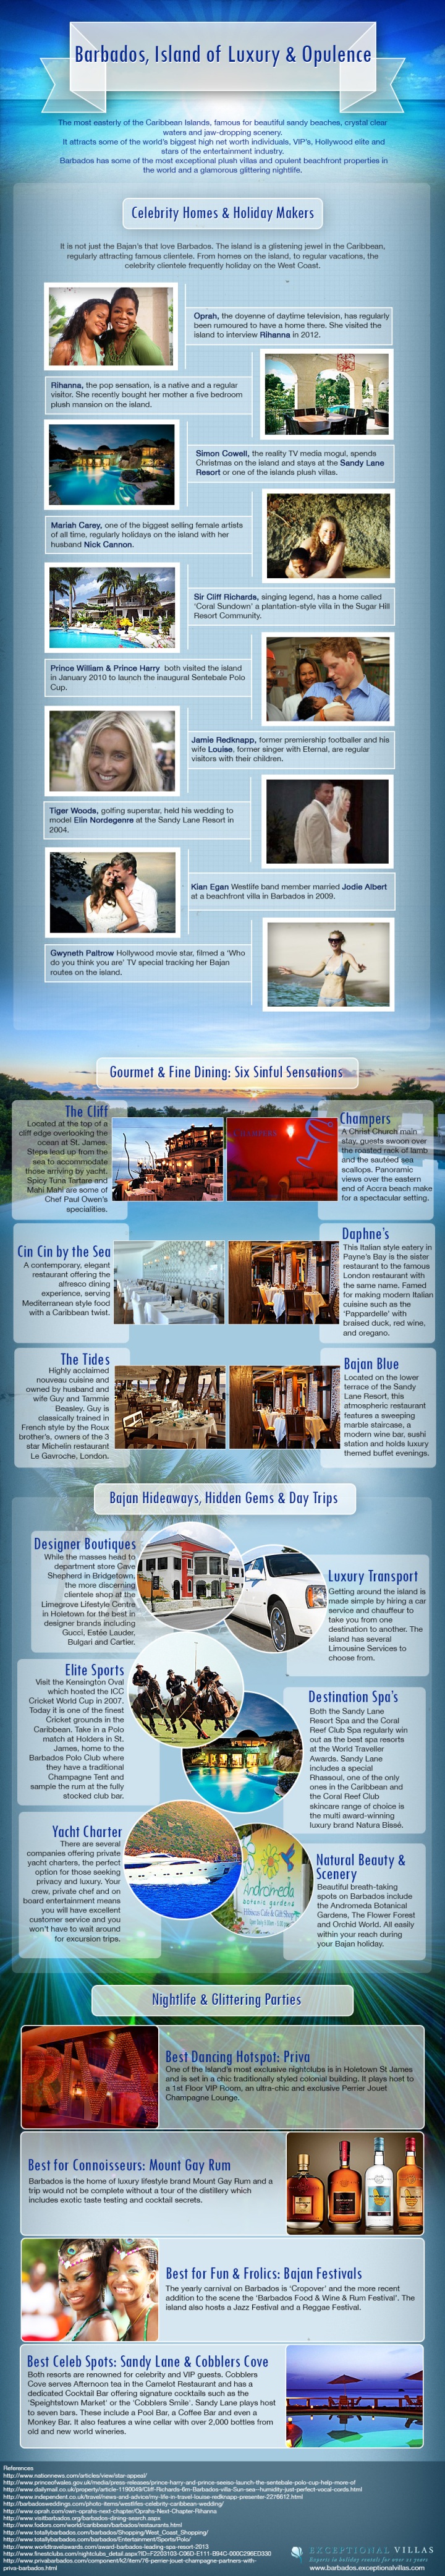 Barbados,_Island_of_luxury_and_Opulence-An_Infographic